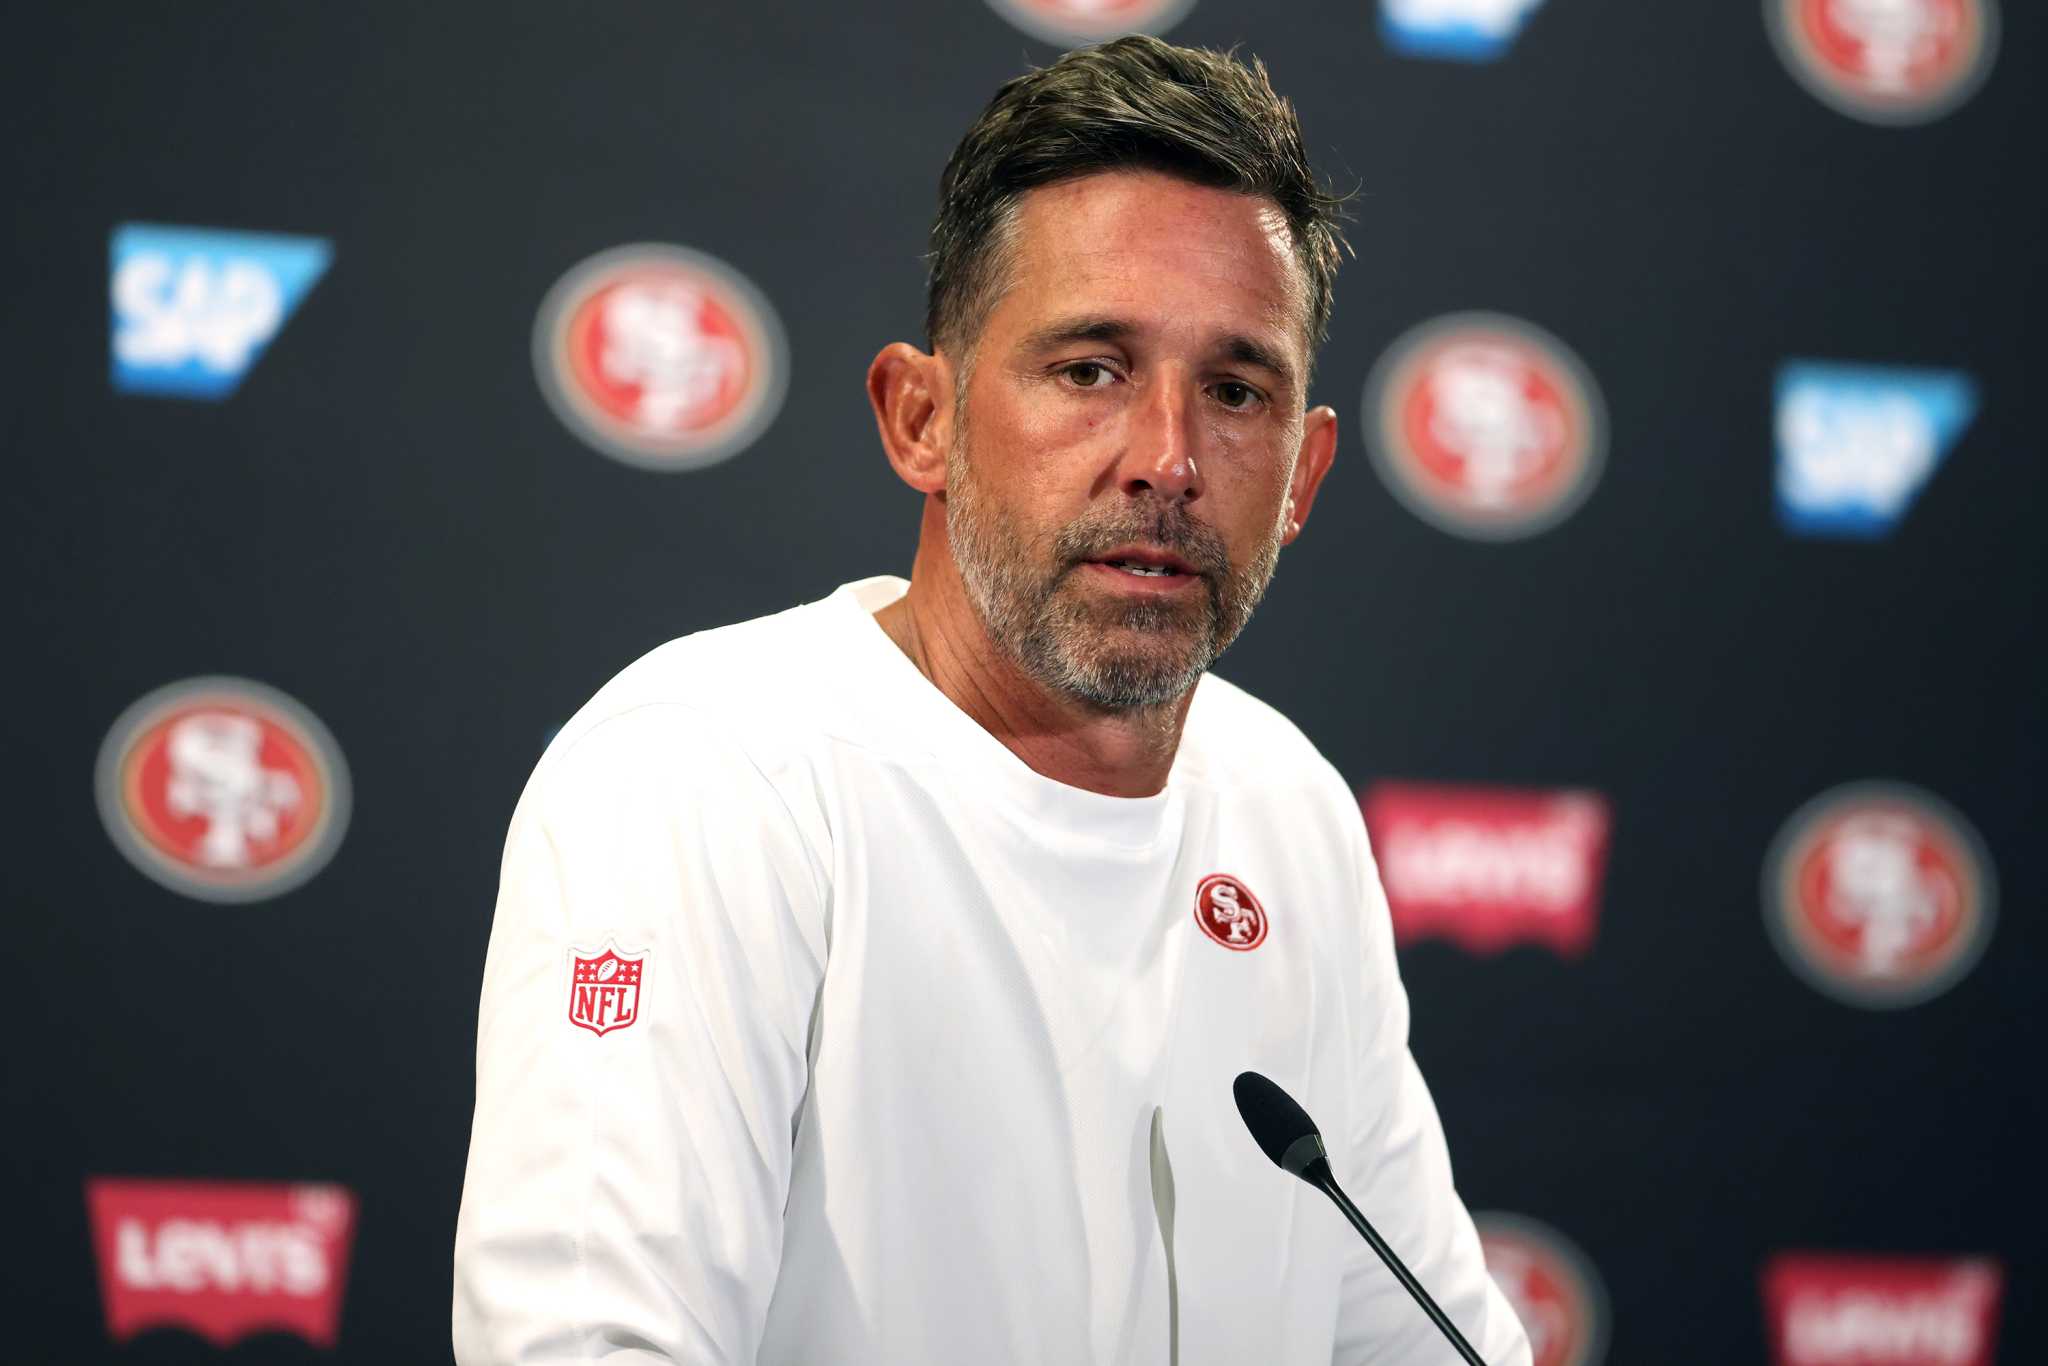 Kyle Shanahan faces biggest 49ers challenge yet: winning the big game